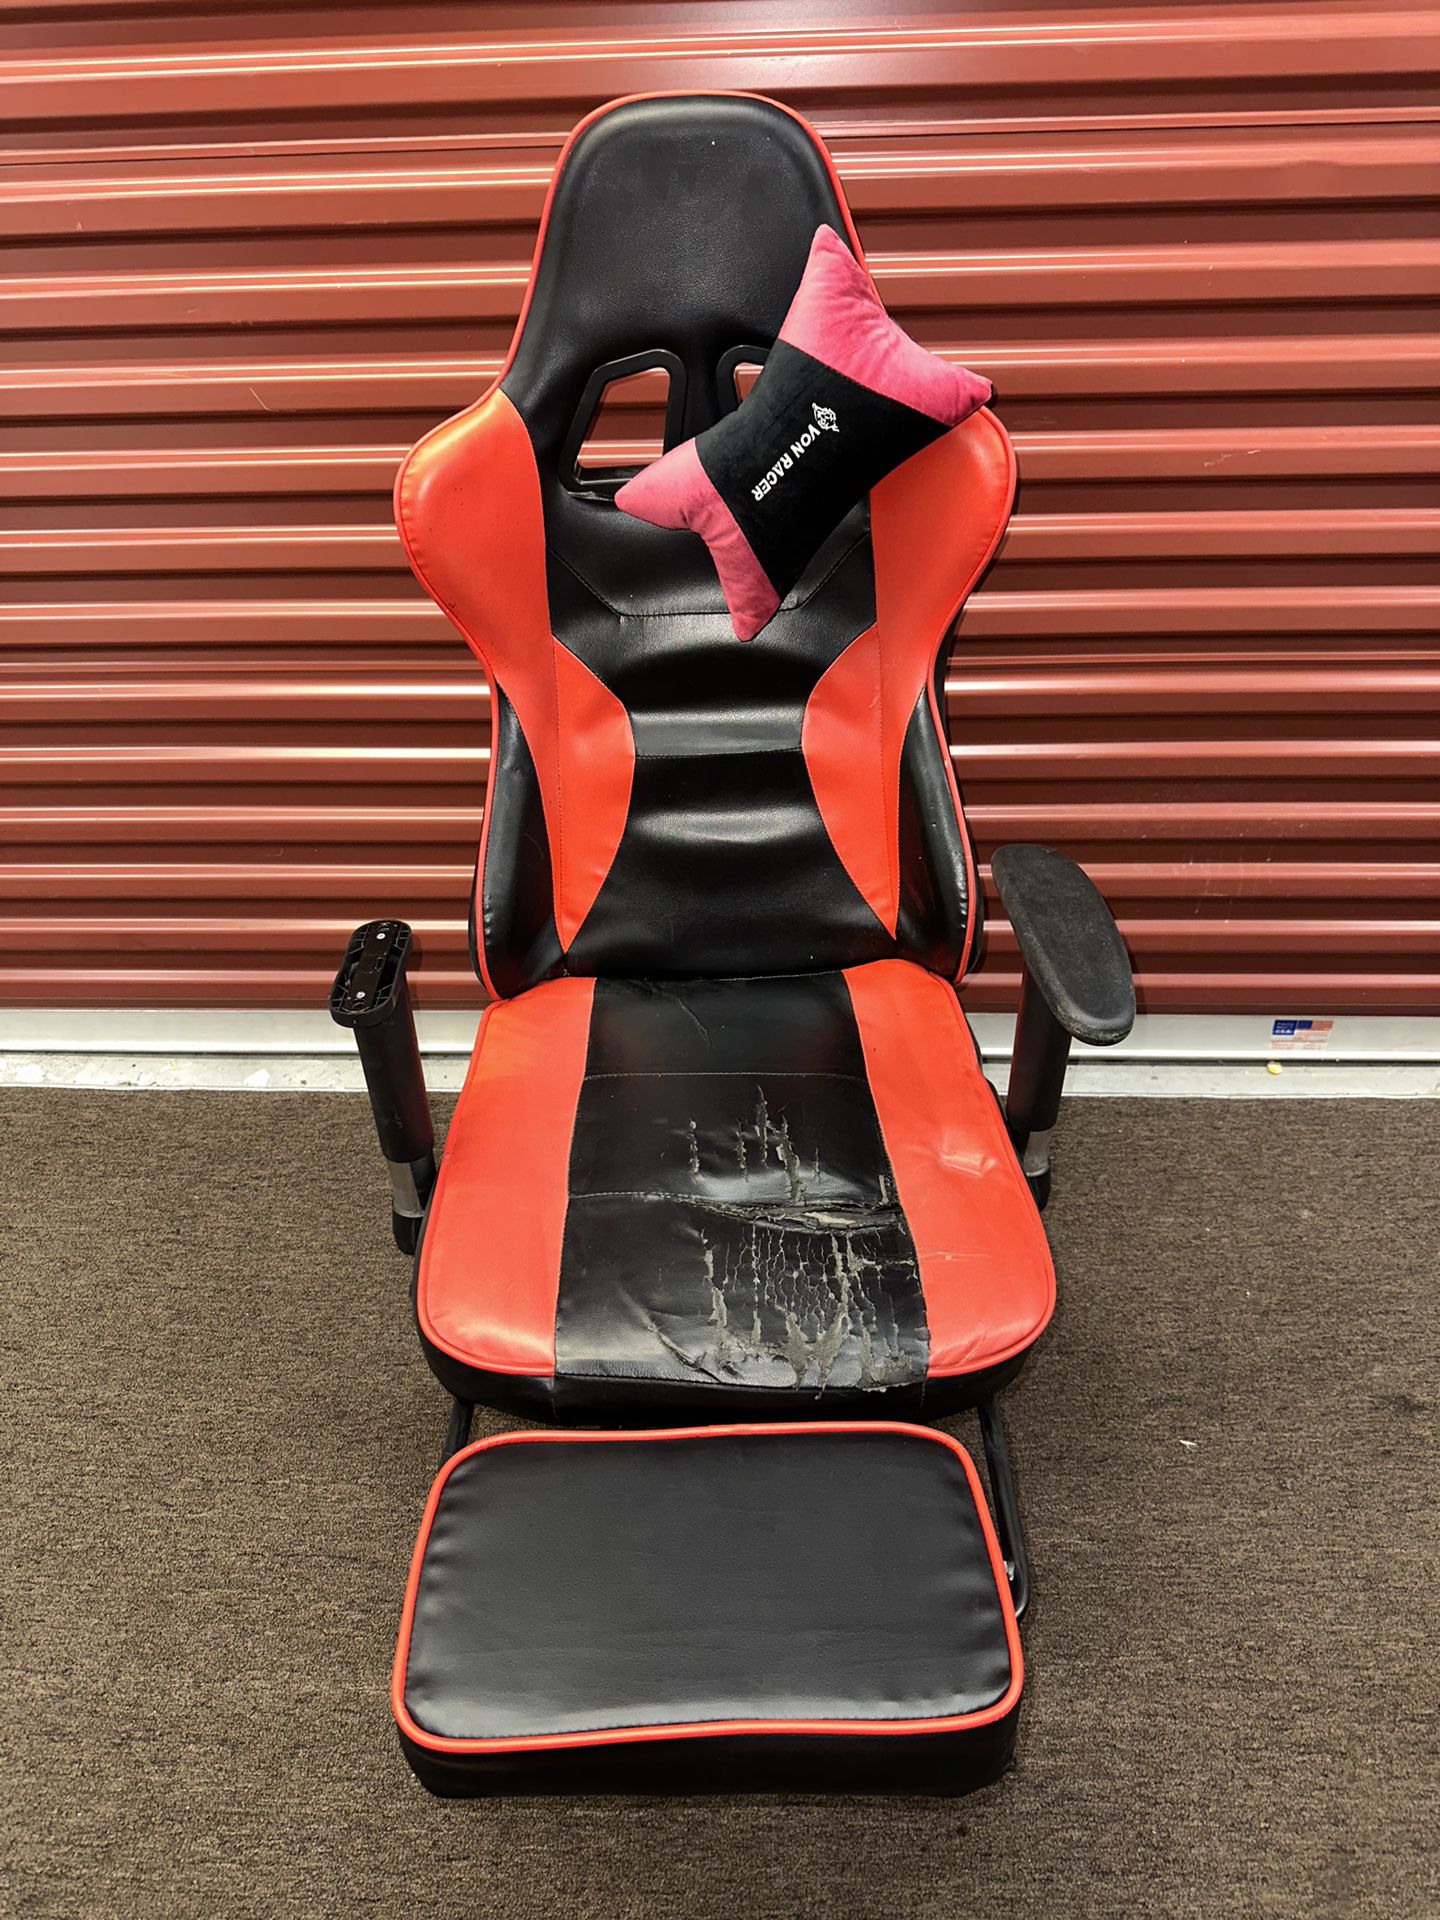 RED RACING GAMING CHAIR 